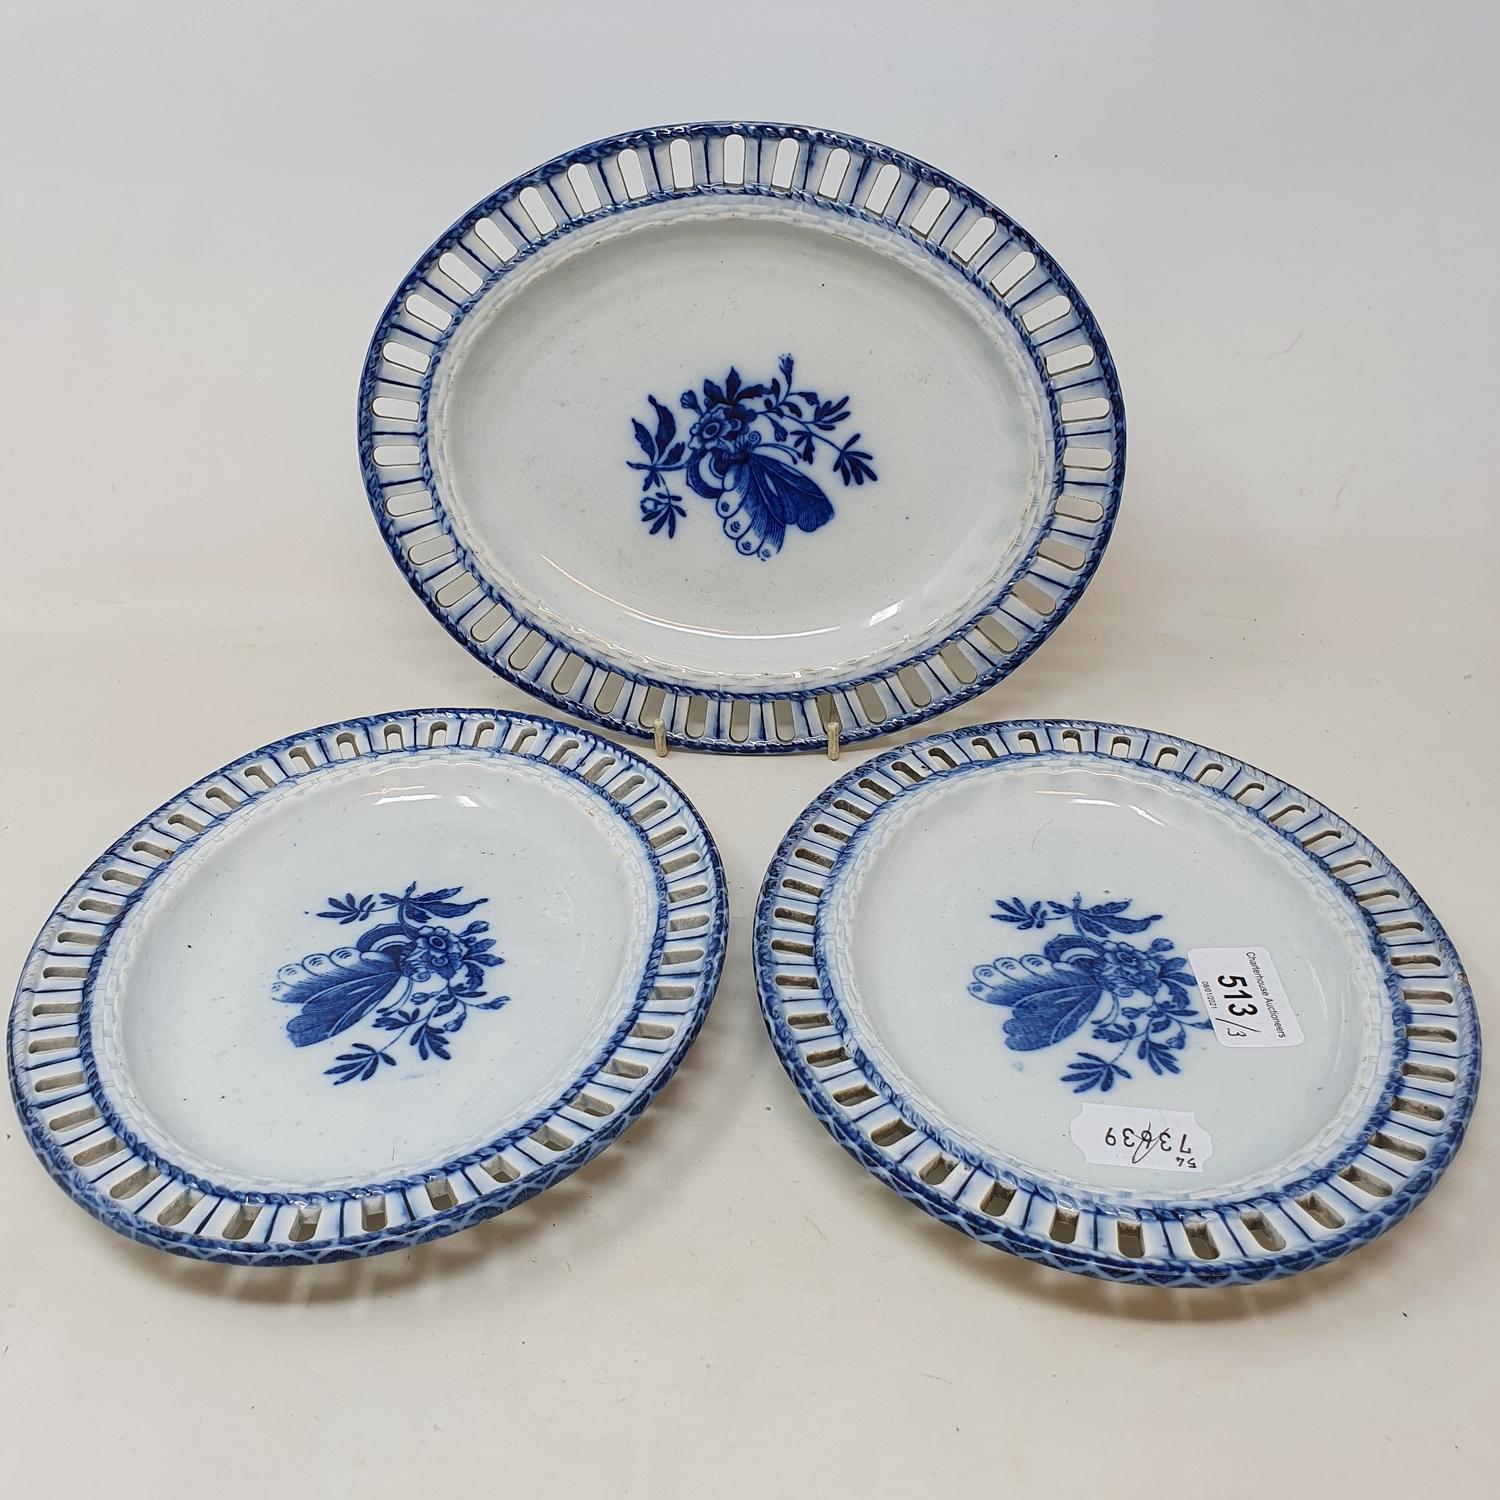 A set of three early 19th century blue and white oval dishes, with pierced rims, decorated